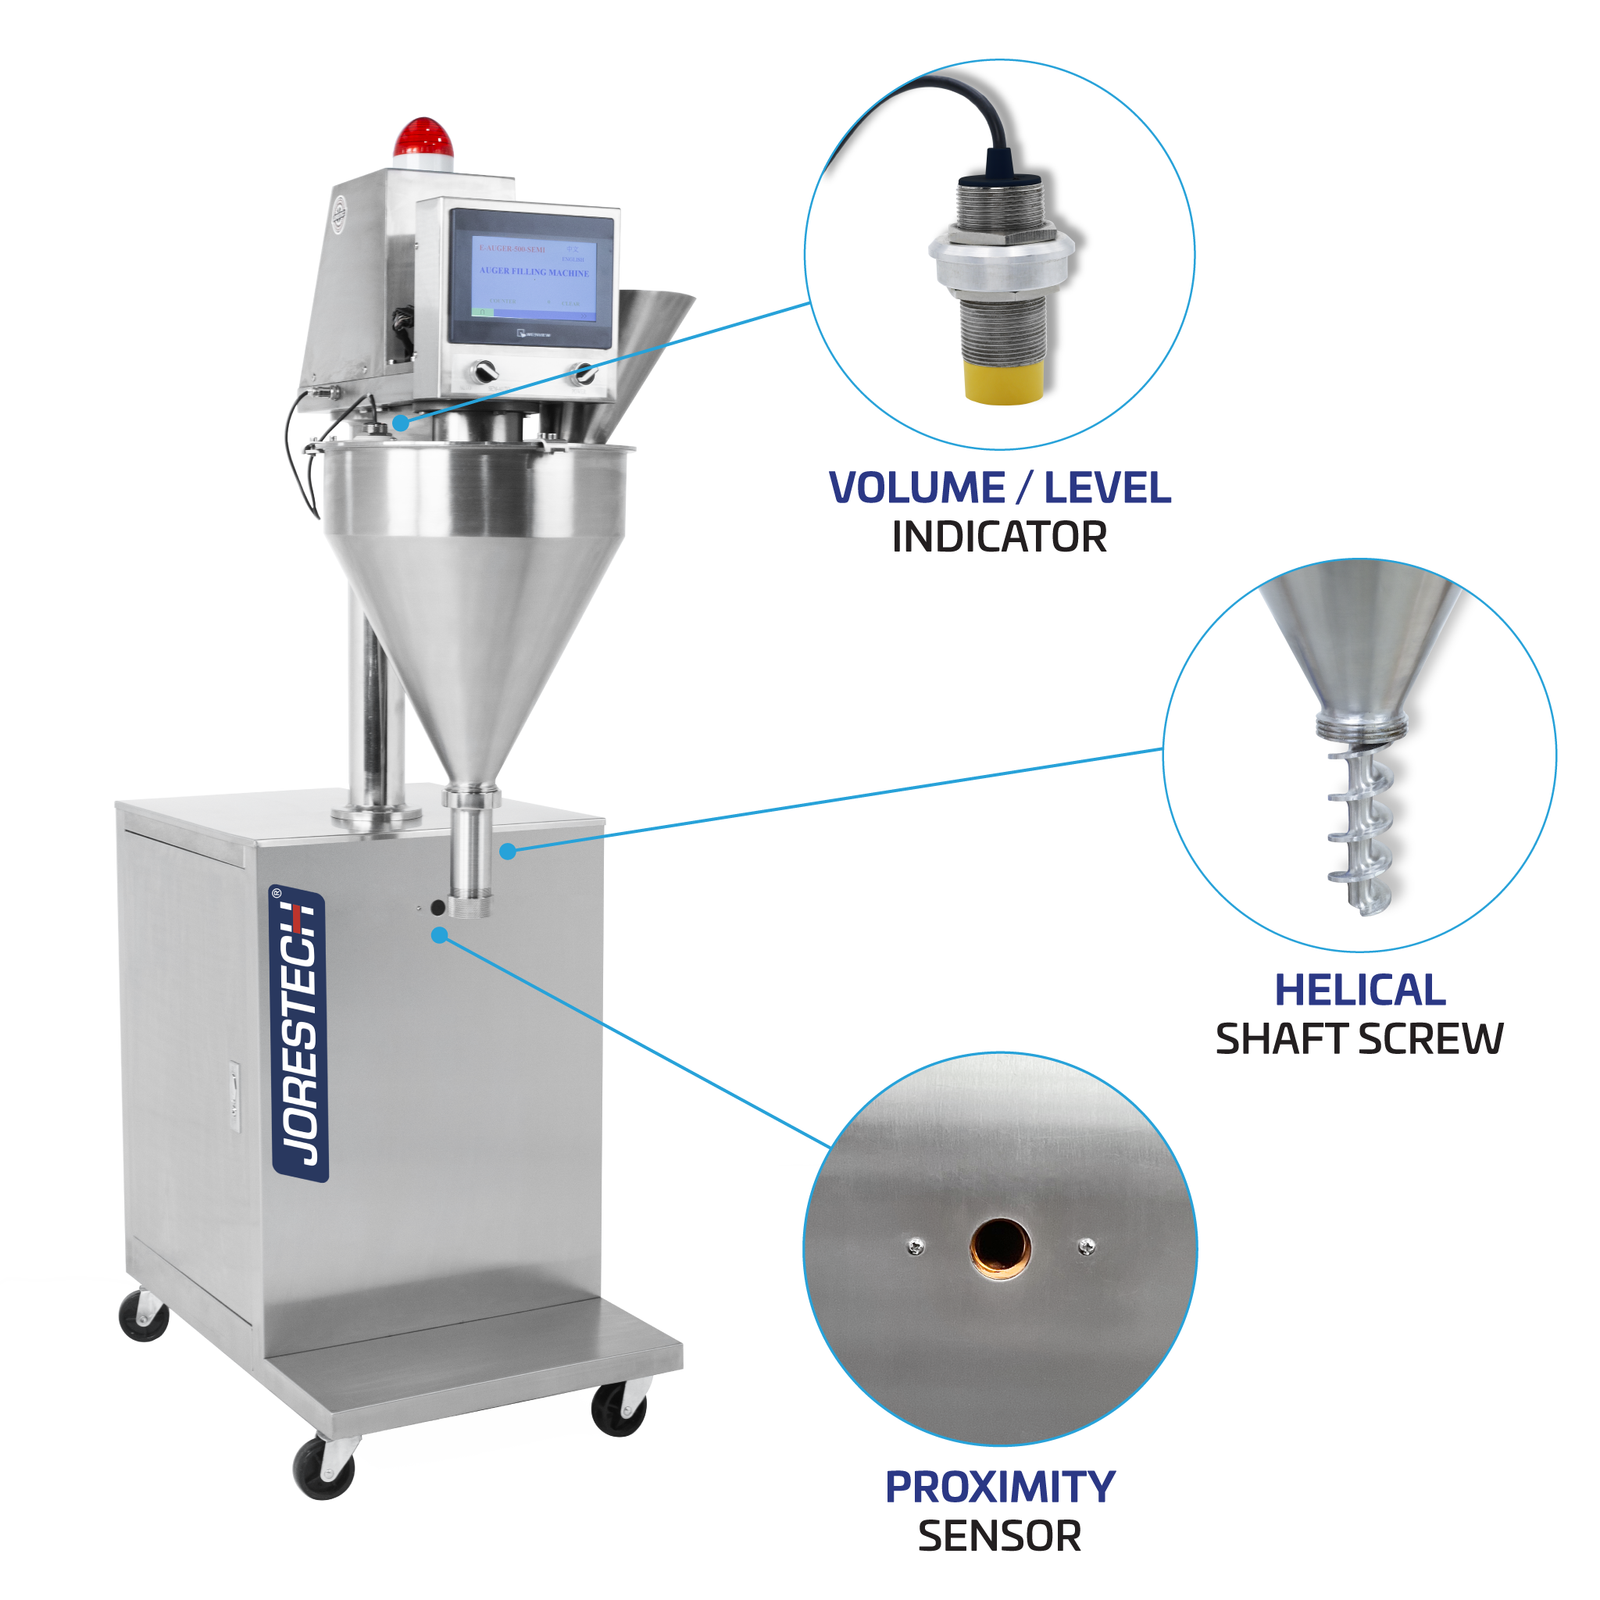 Infographic of a semi automatic auger powder filler and dispensing machine shown in a diagonal view indicating three features which are: “volume level indicator”, “helical shaft screw”, and “proximity sensor”.